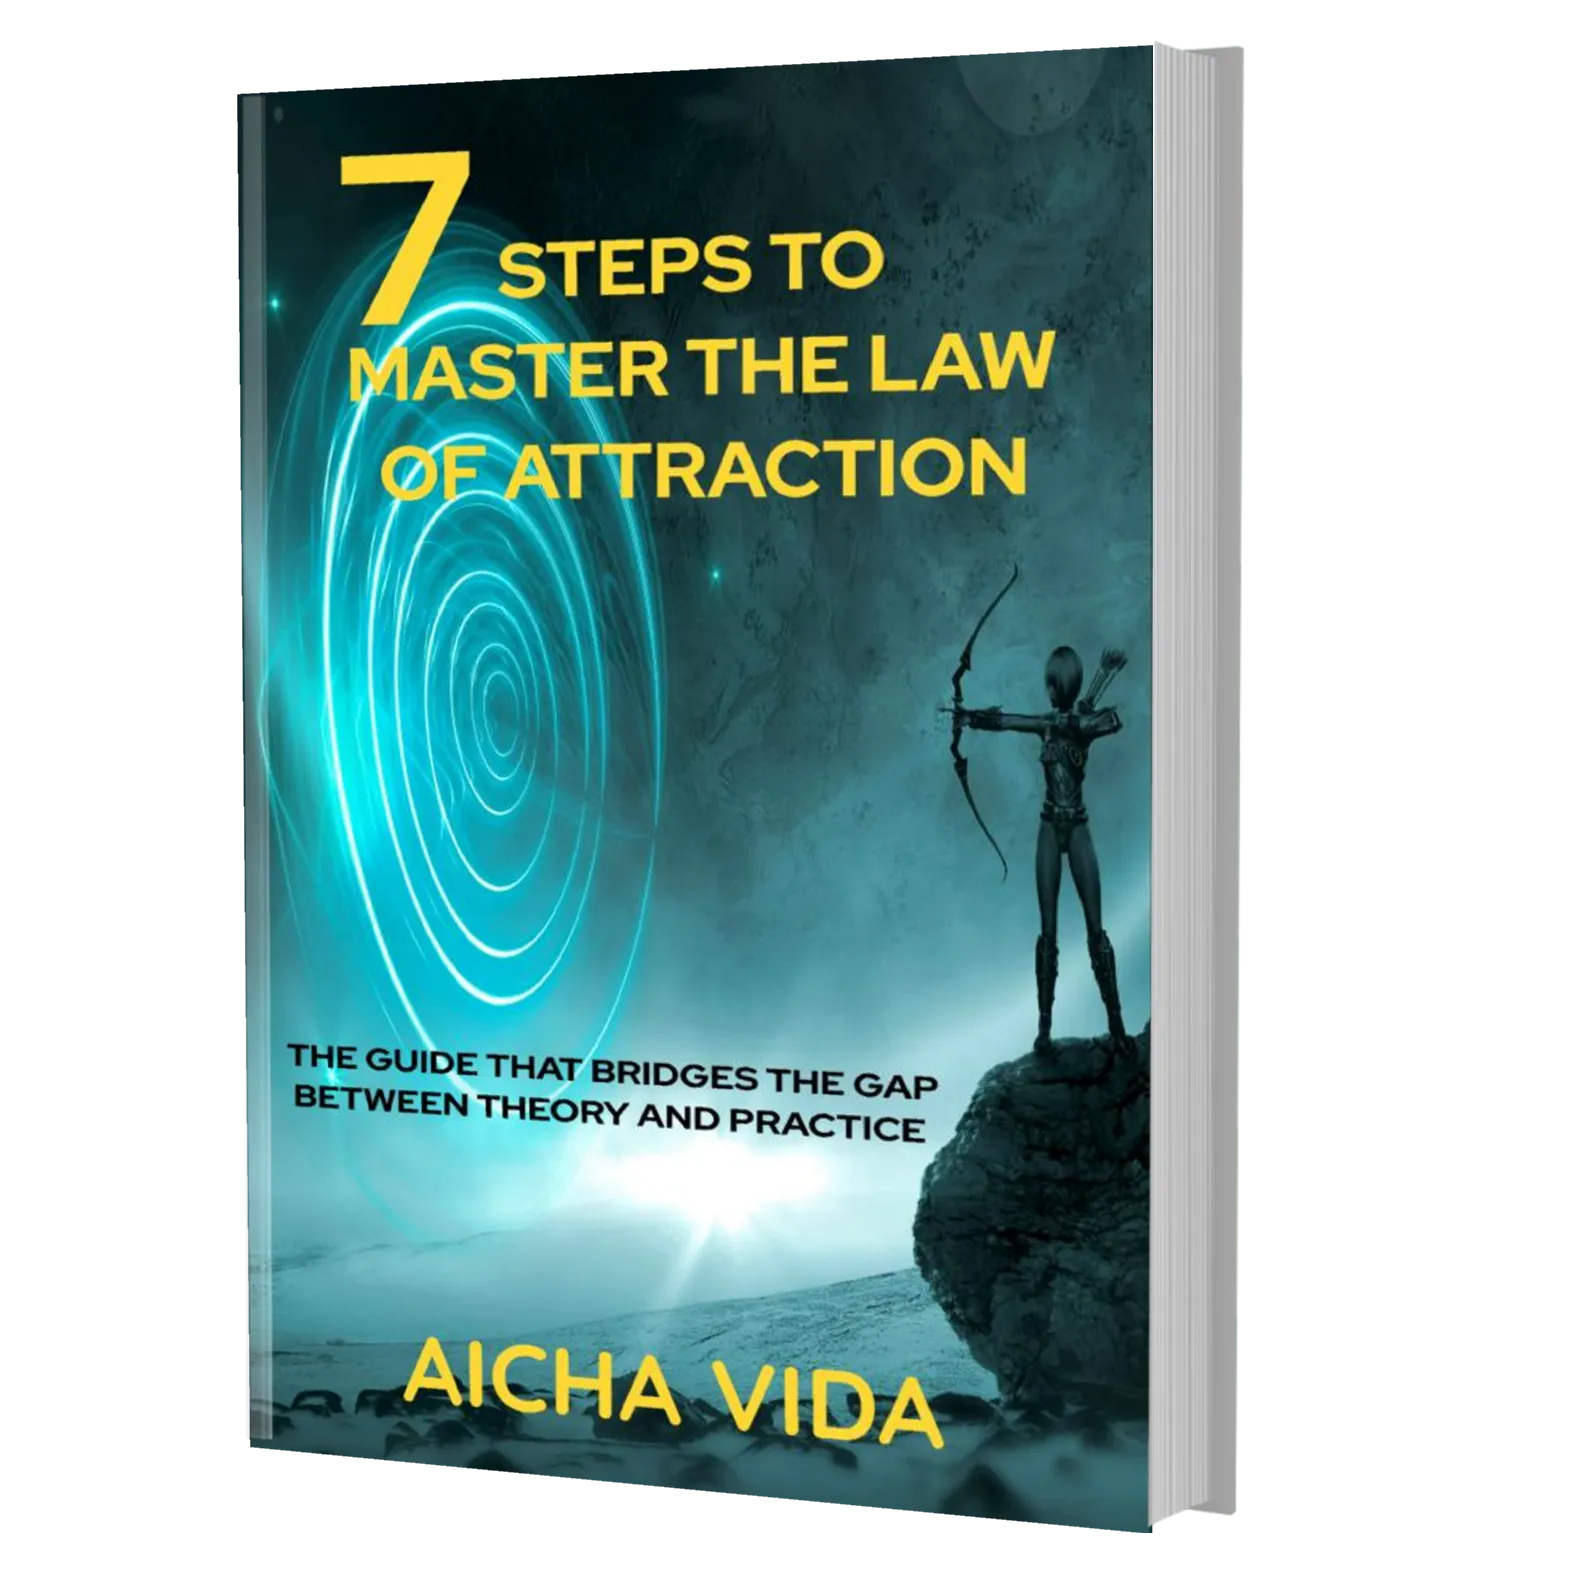 7 STEPS TO MASTER THE LAW OF ATTRACTION